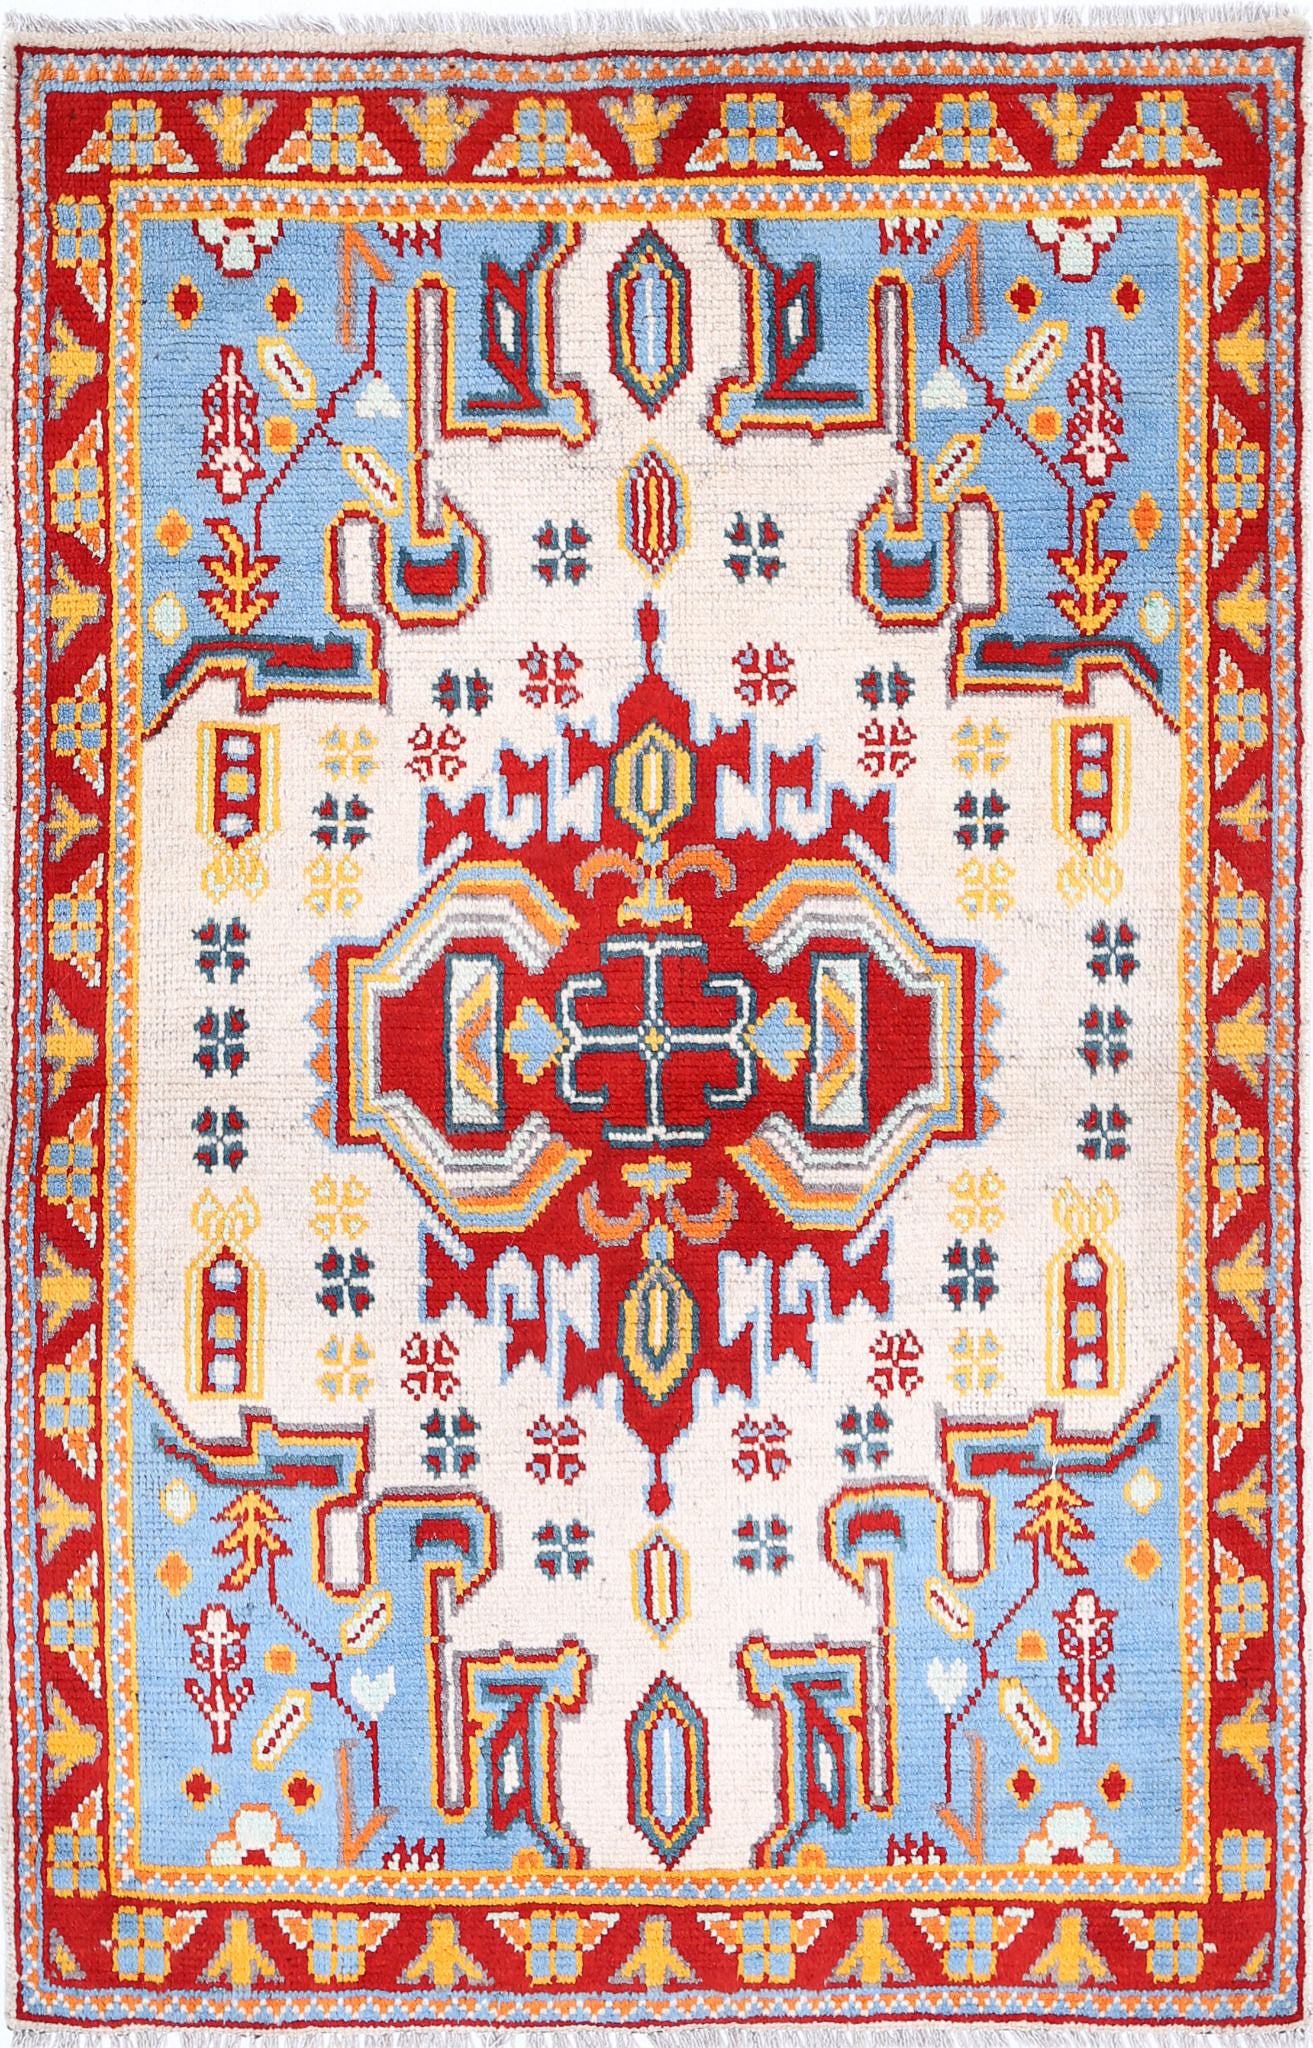 Revival-hand-knotted-qarghani-wool-rug-5014046.jpg